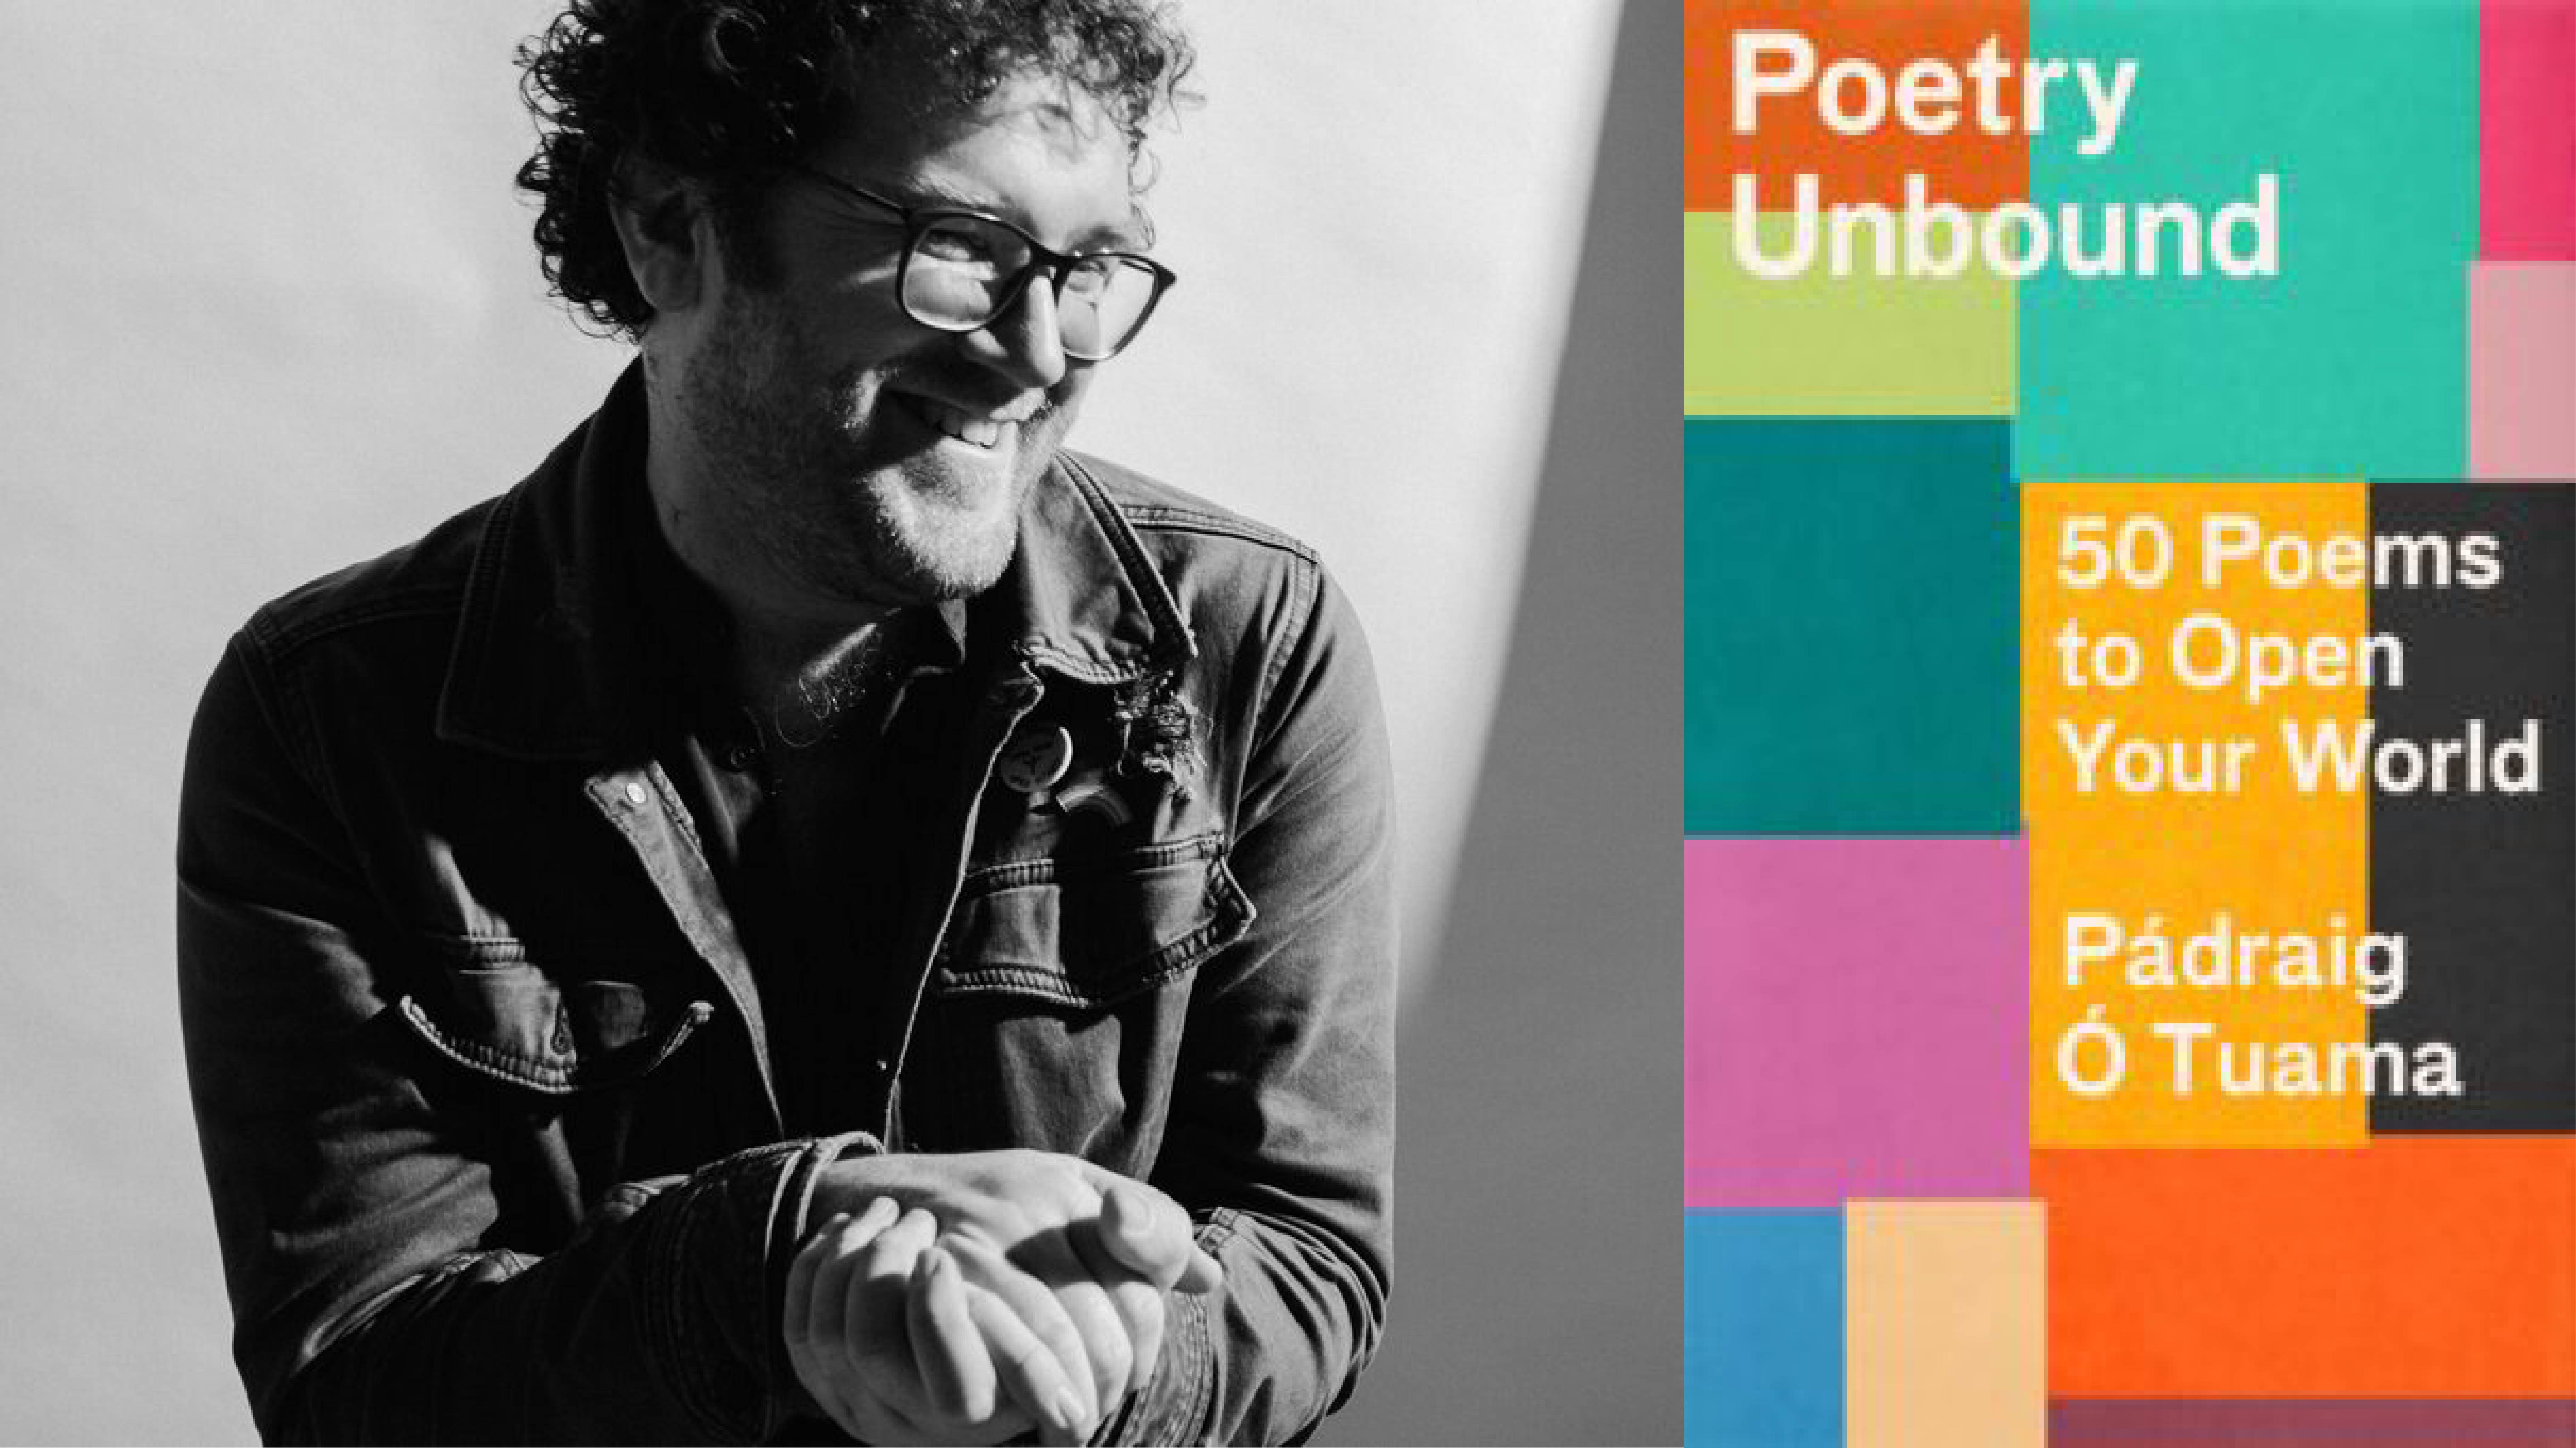 Book Launch: Poetry Unbound by Pádraig Ó Tuama